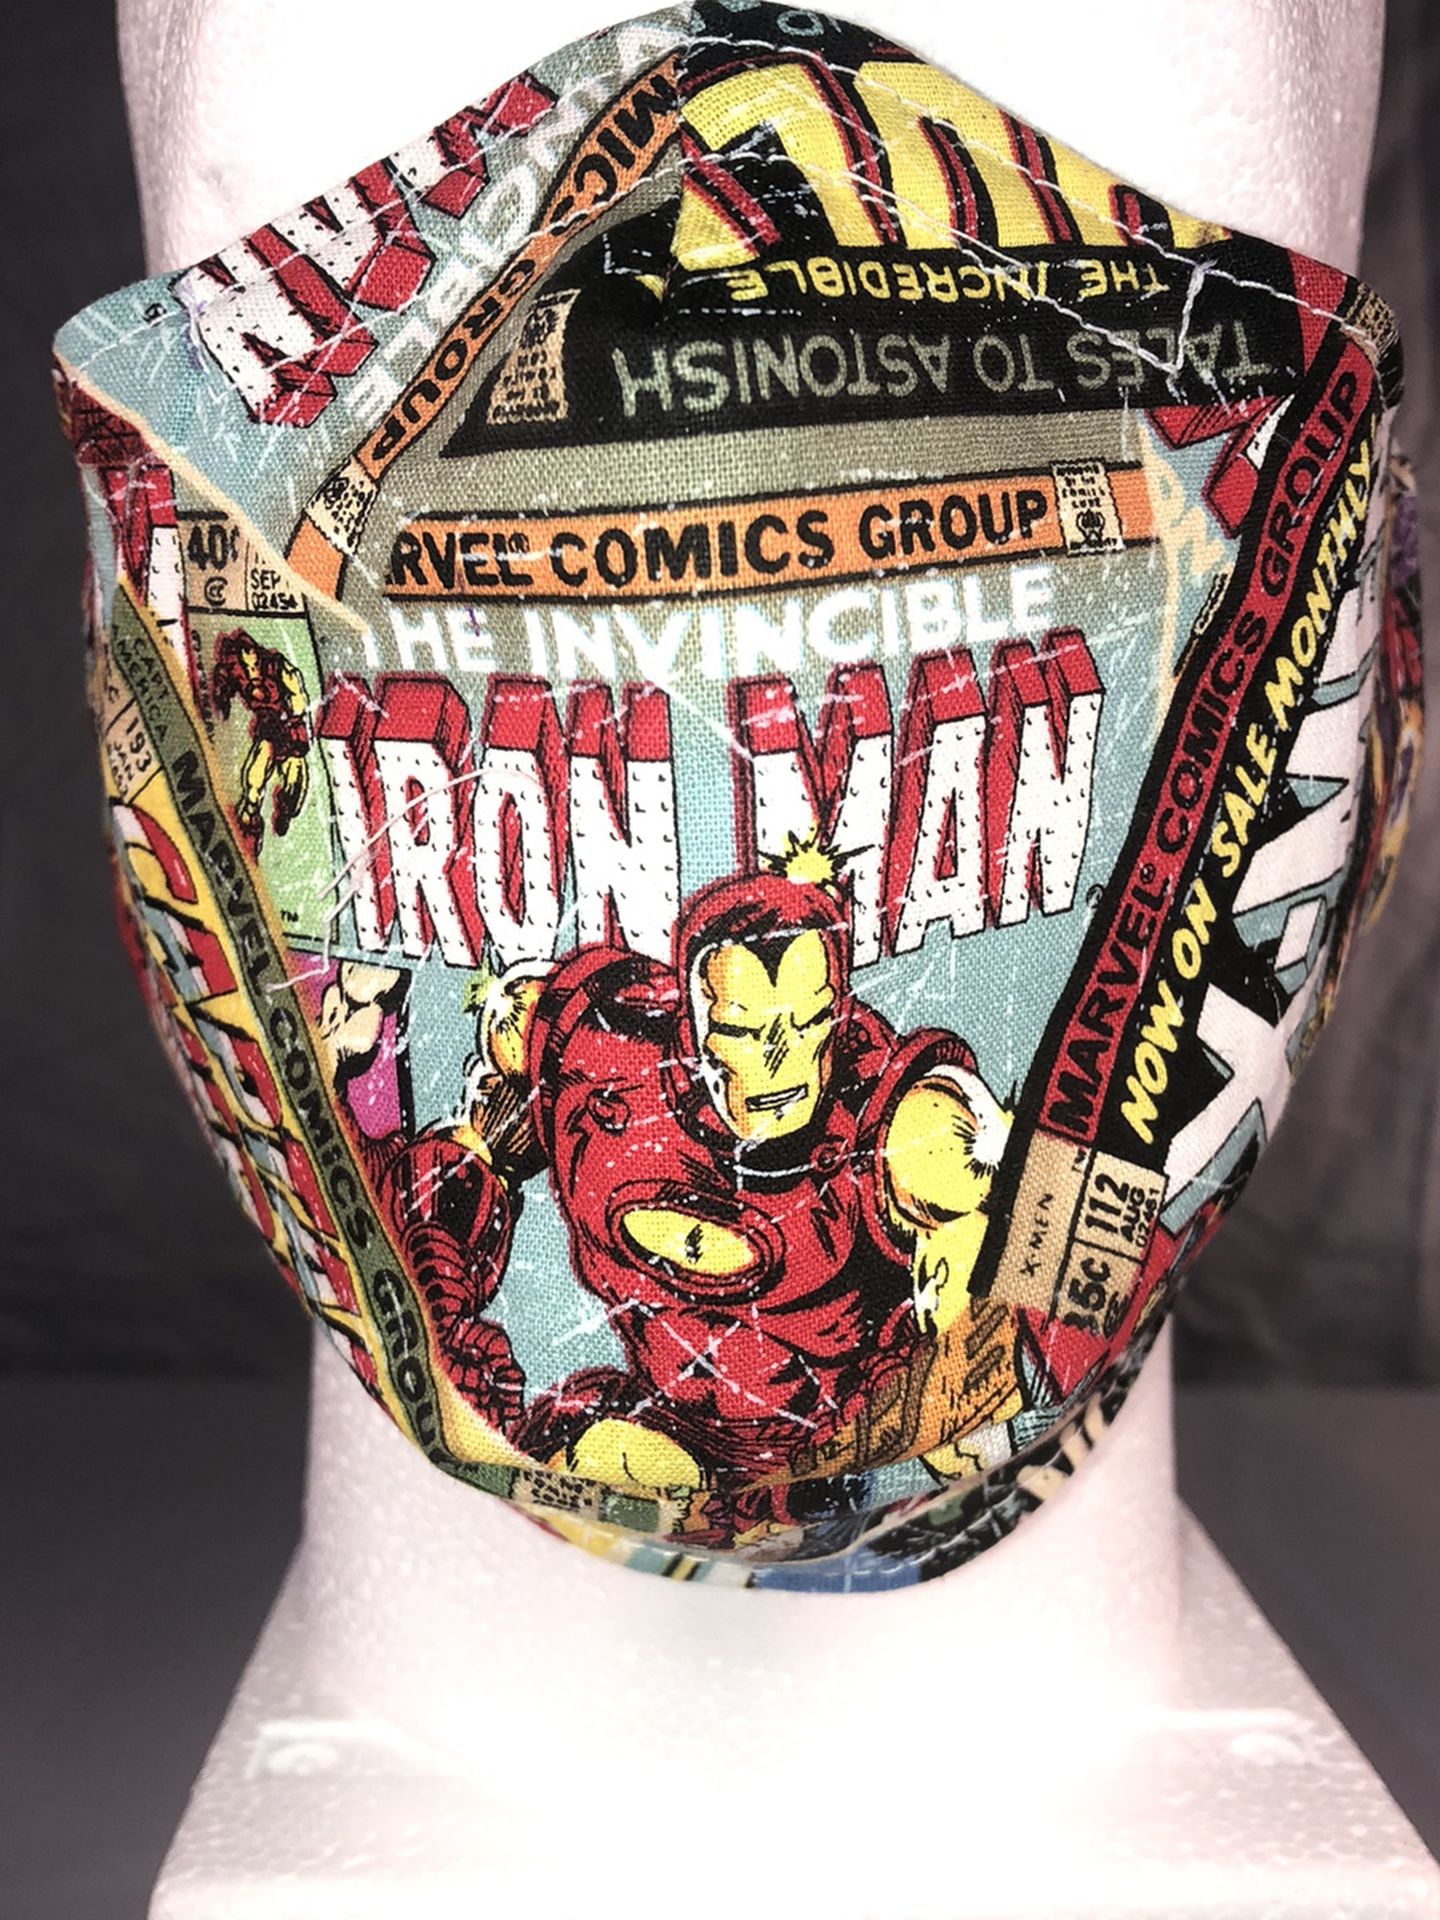 Face Mask with Marvel Heroes